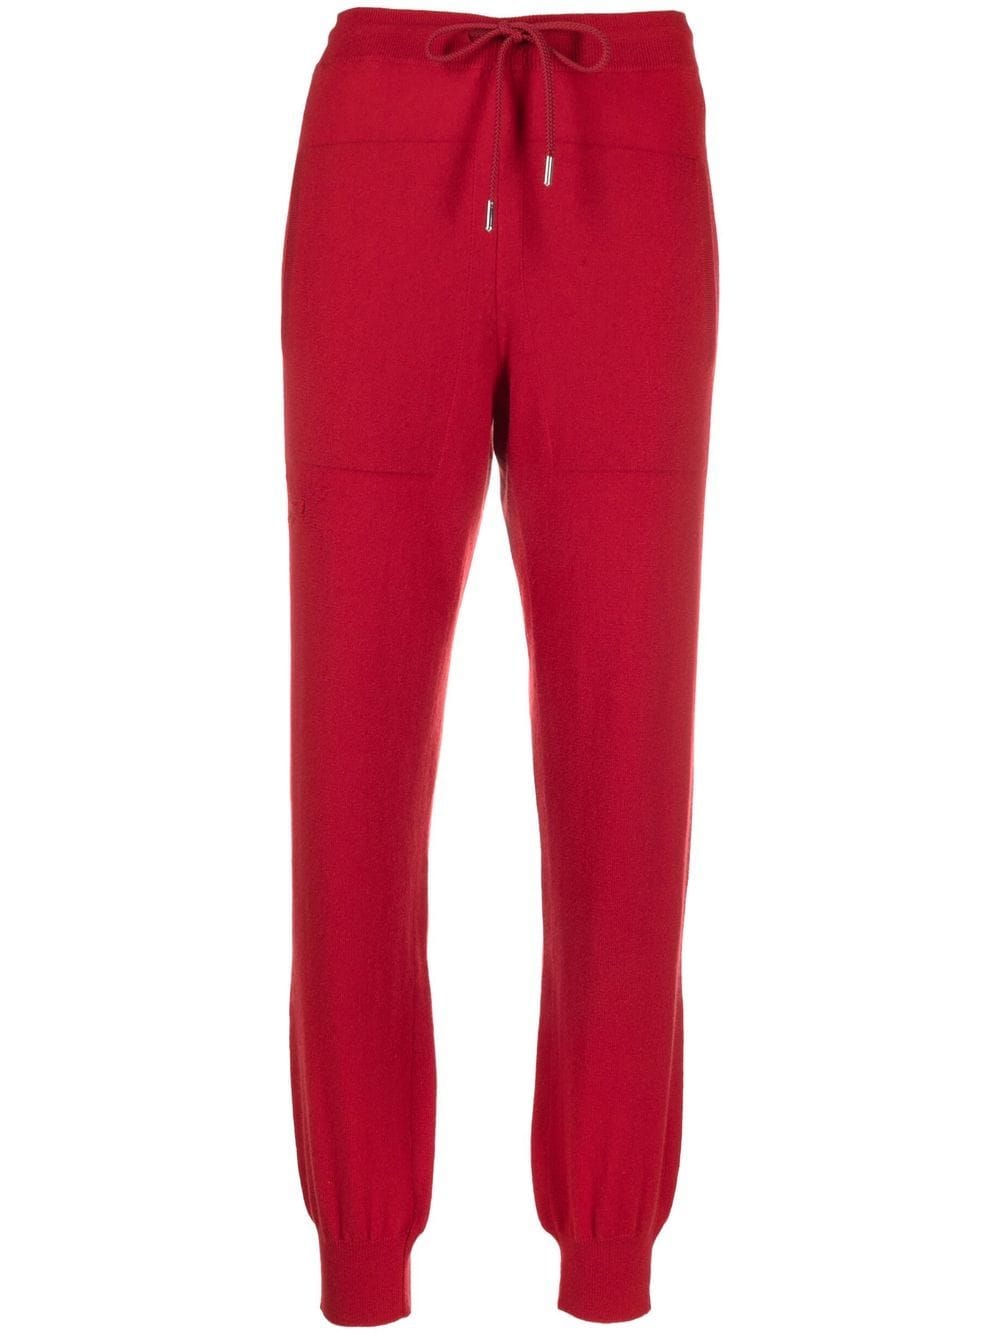 Barrie drawstring knitted track pants - Red von Barrie